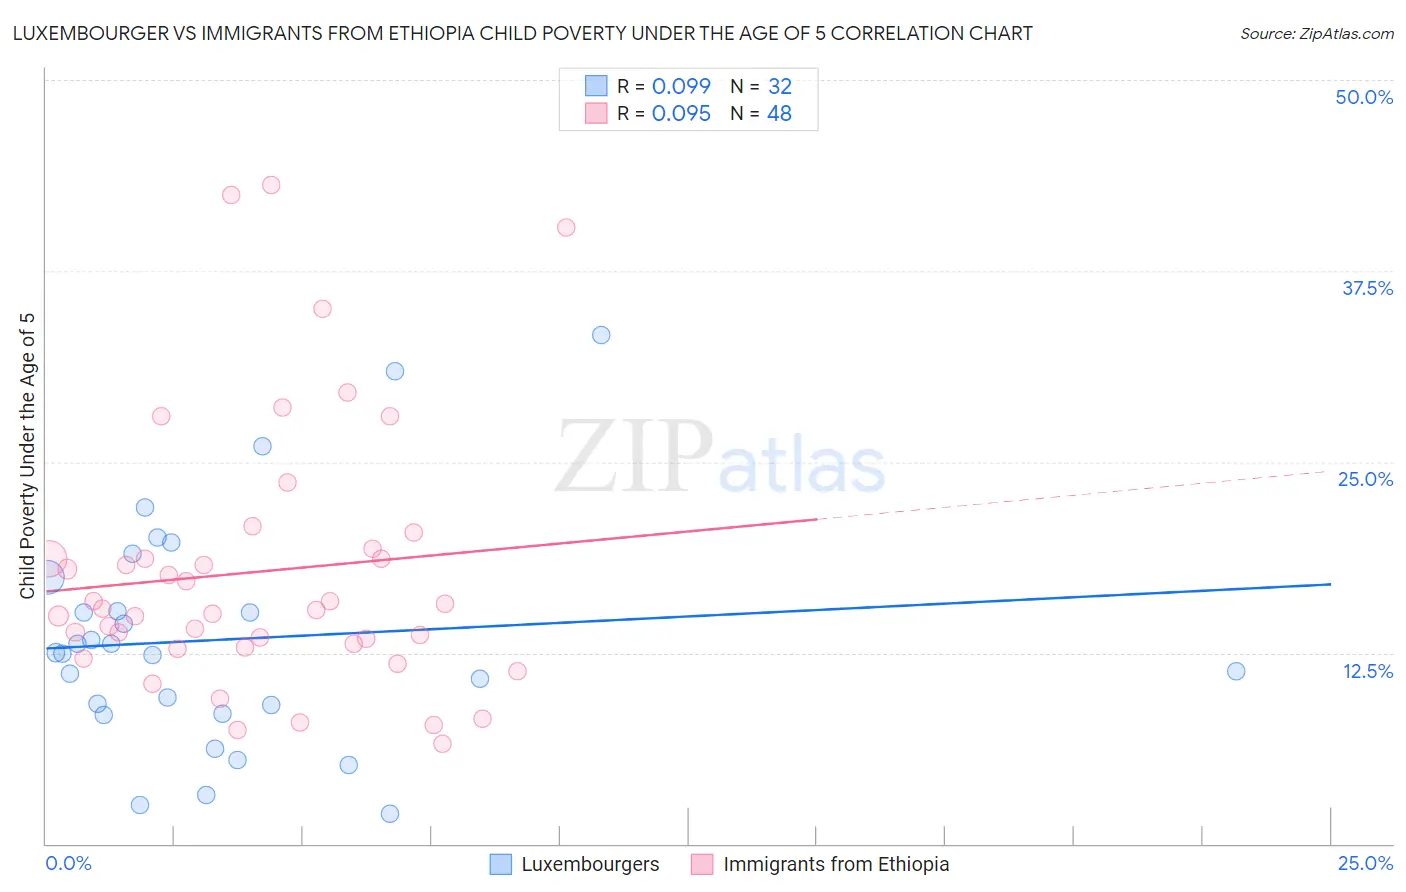 Luxembourger vs Immigrants from Ethiopia Child Poverty Under the Age of 5